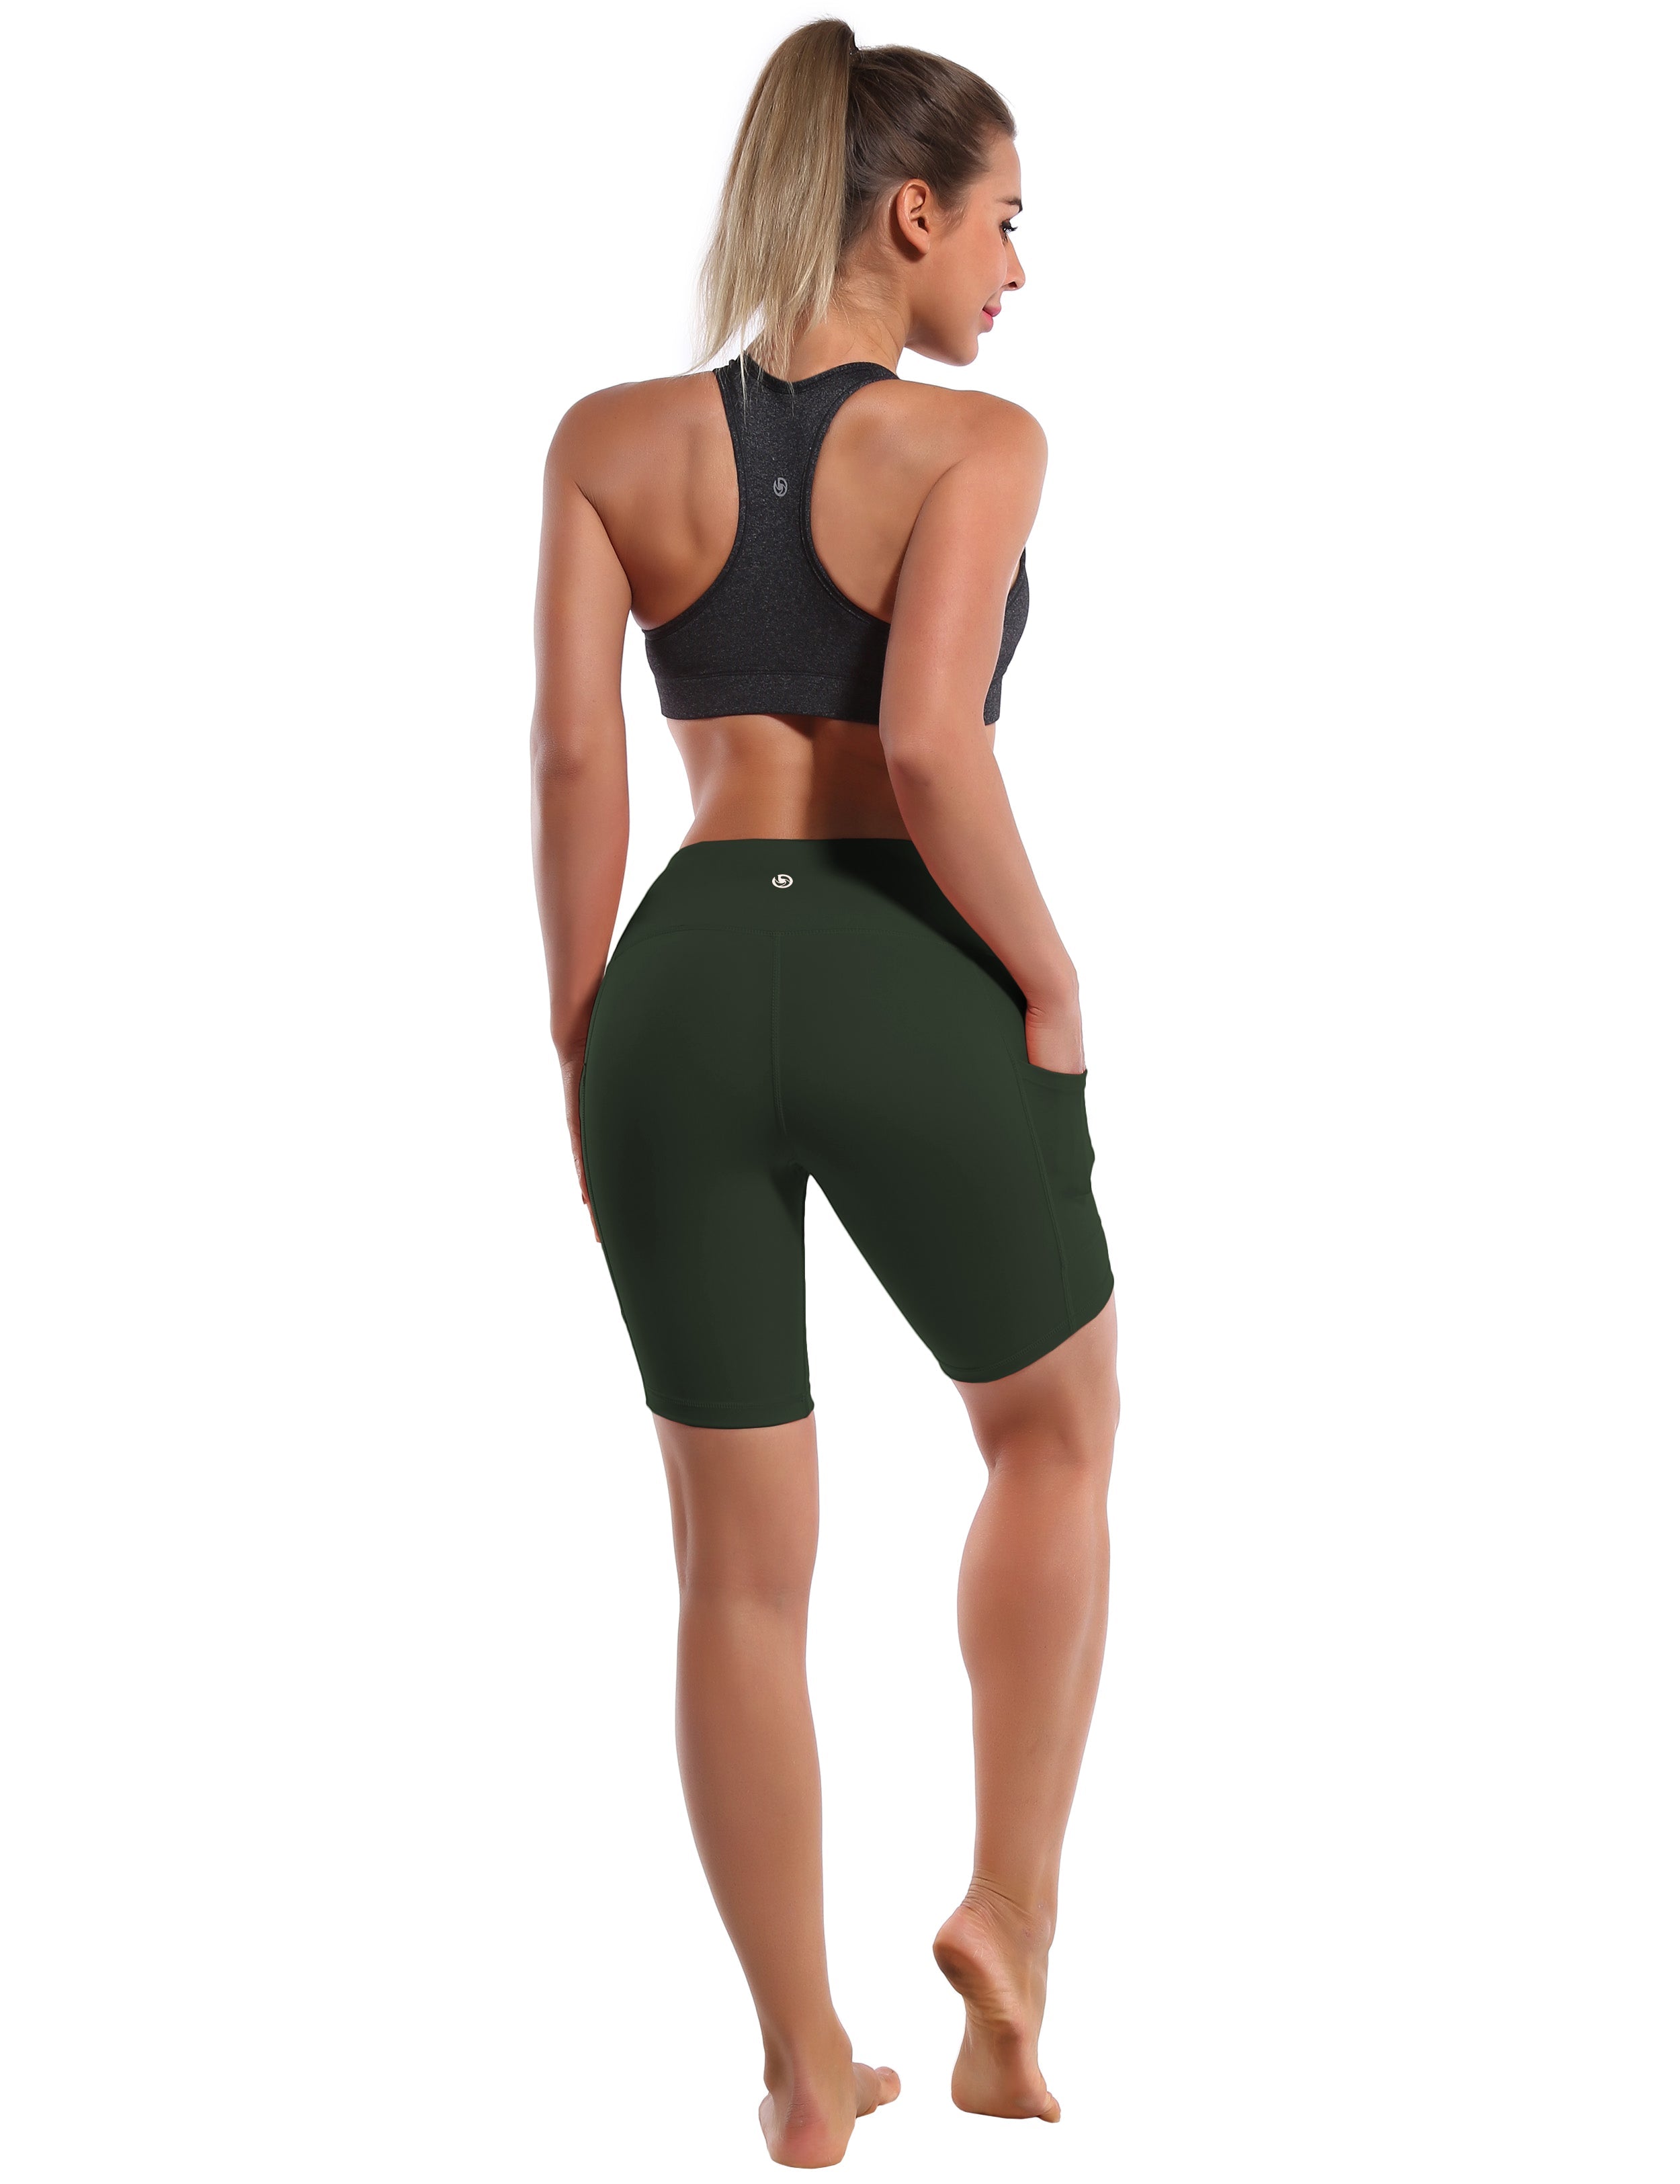 8" Side Pockets Biking Shorts olivegray Sleek, soft, smooth and totally comfortable: our newest style is here. Softest-ever fabric High elasticity High density 4-way stretch Fabric doesn't attract lint easily No see-through Moisture-wicking Machine wash 75% Nylon, 25% Spandex